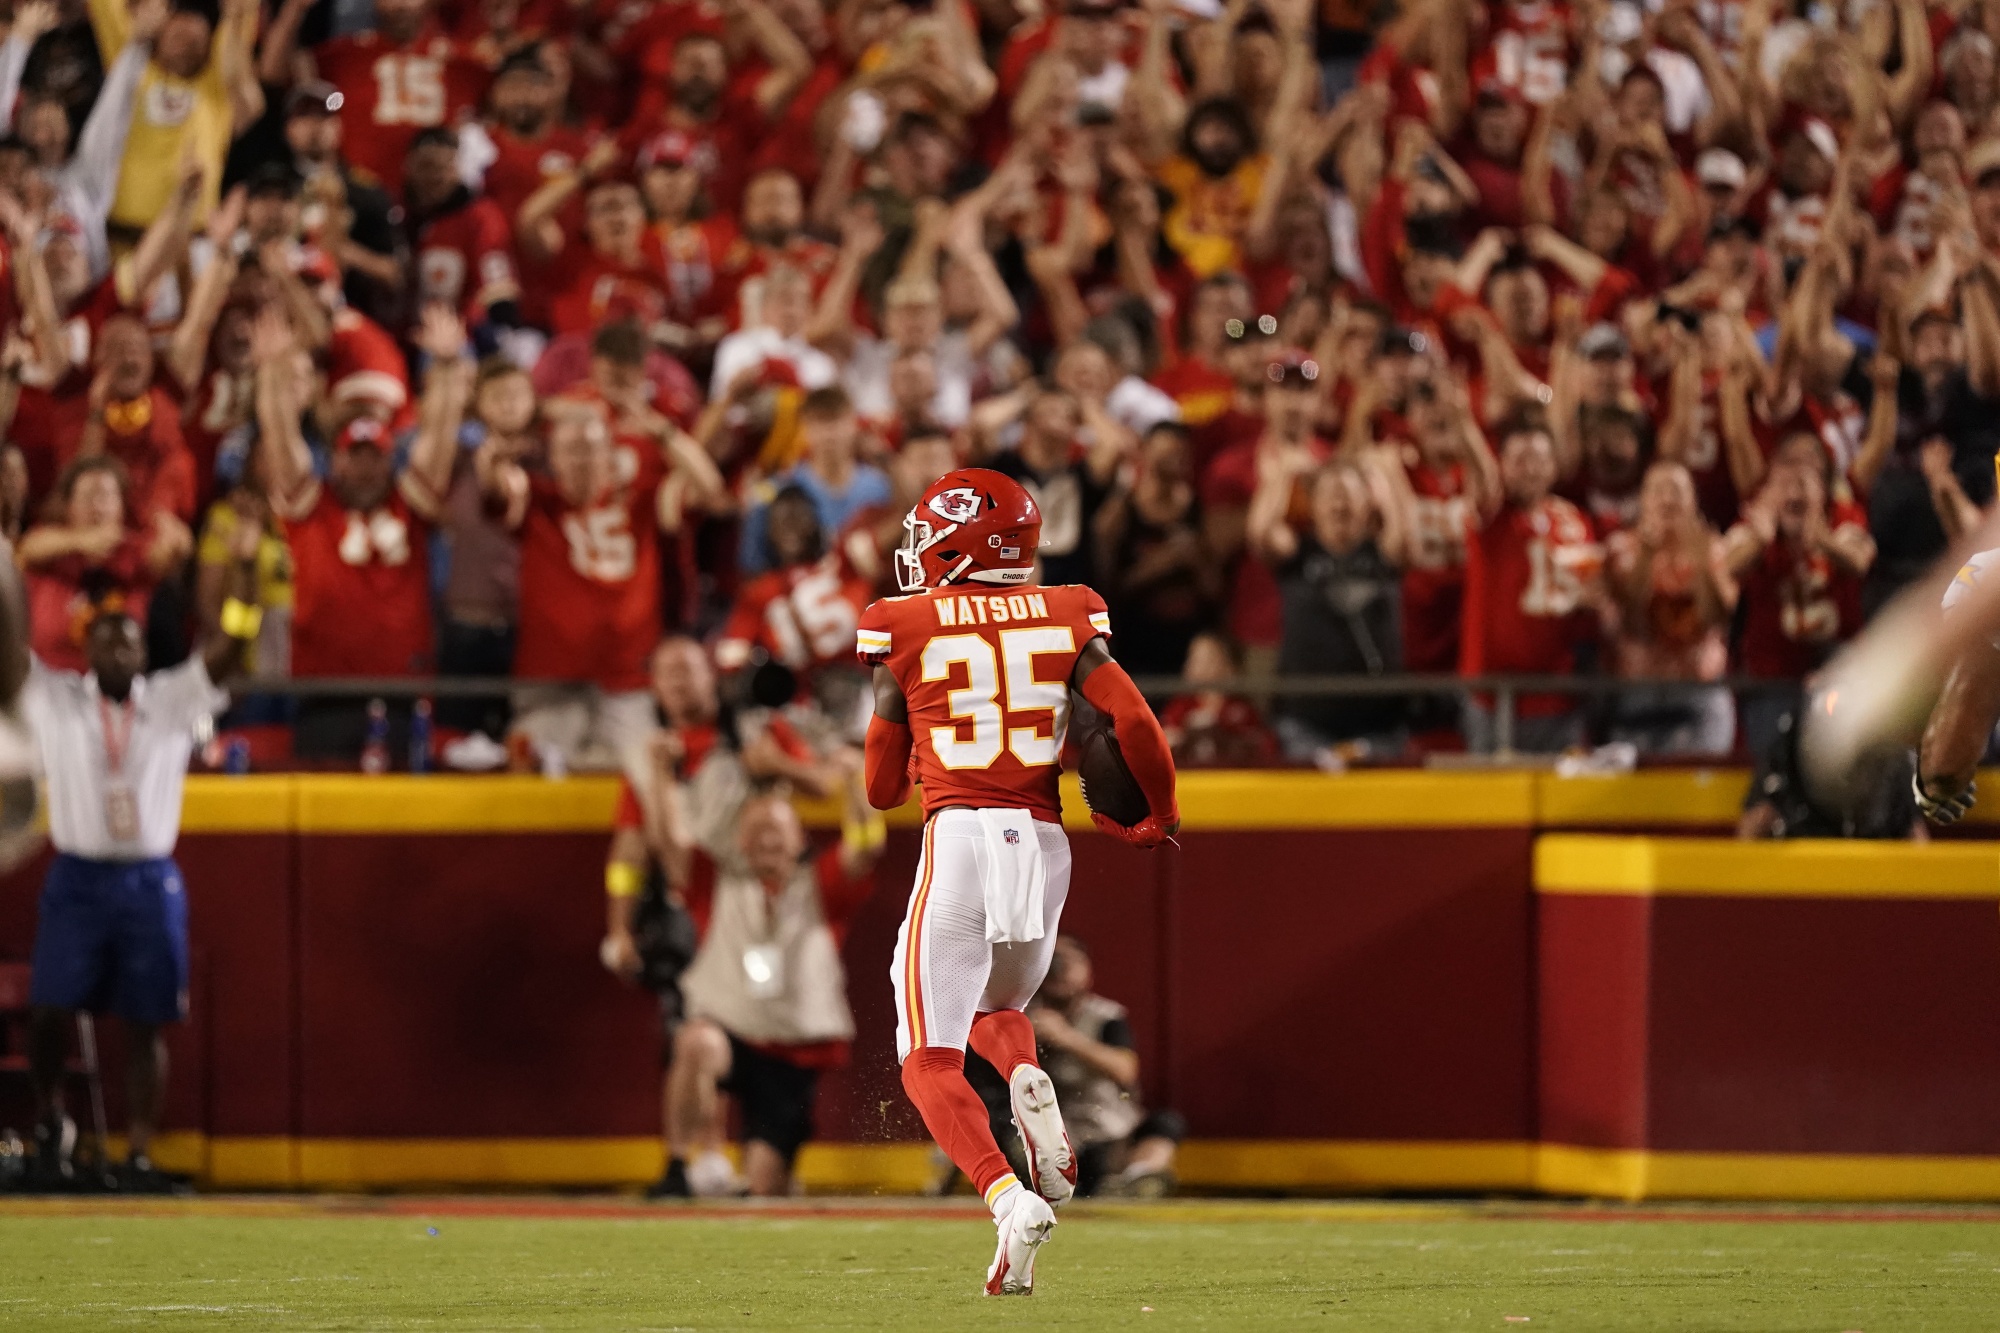 Chiefs Rally Past Chargers 27-24 in Early AFC West Showdown - Bloomberg